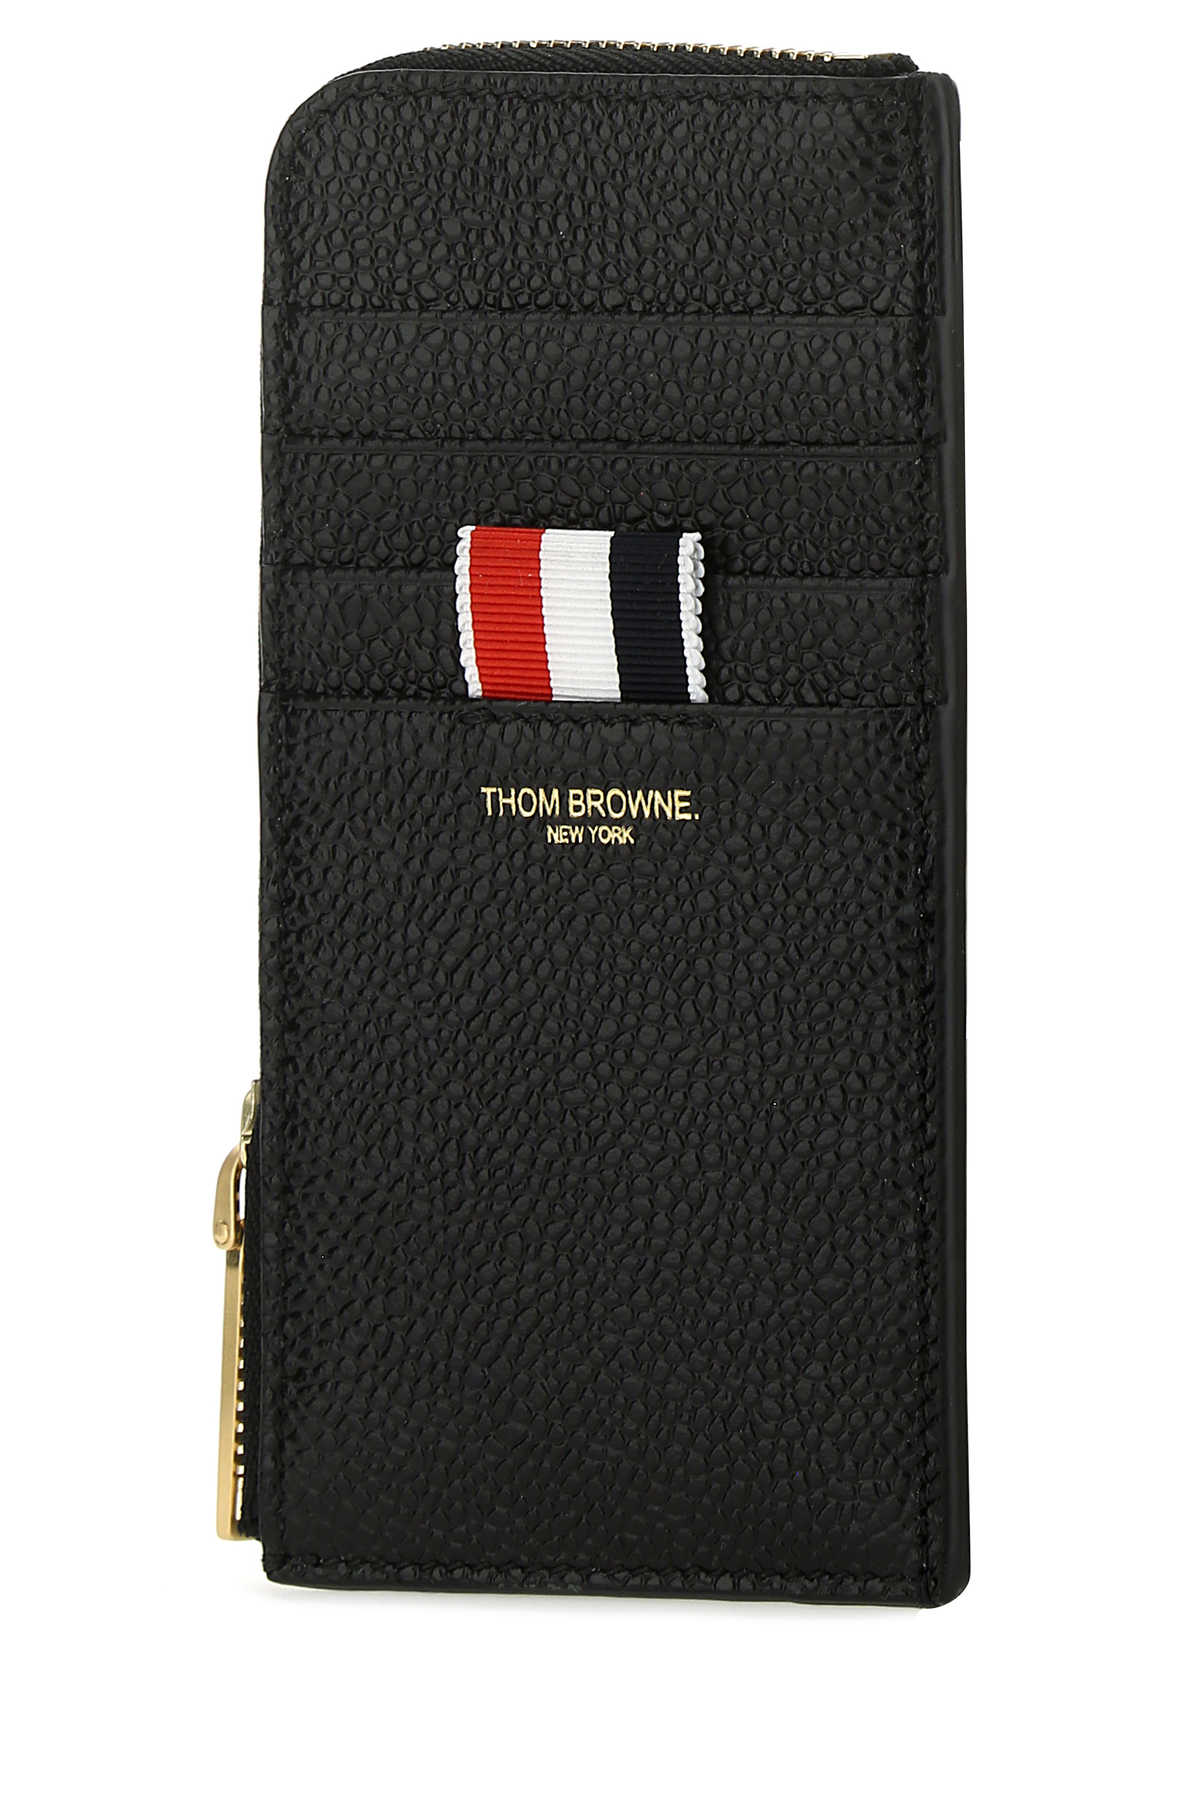 THOM BROWNE BLACK LEATHER COIN PURSE